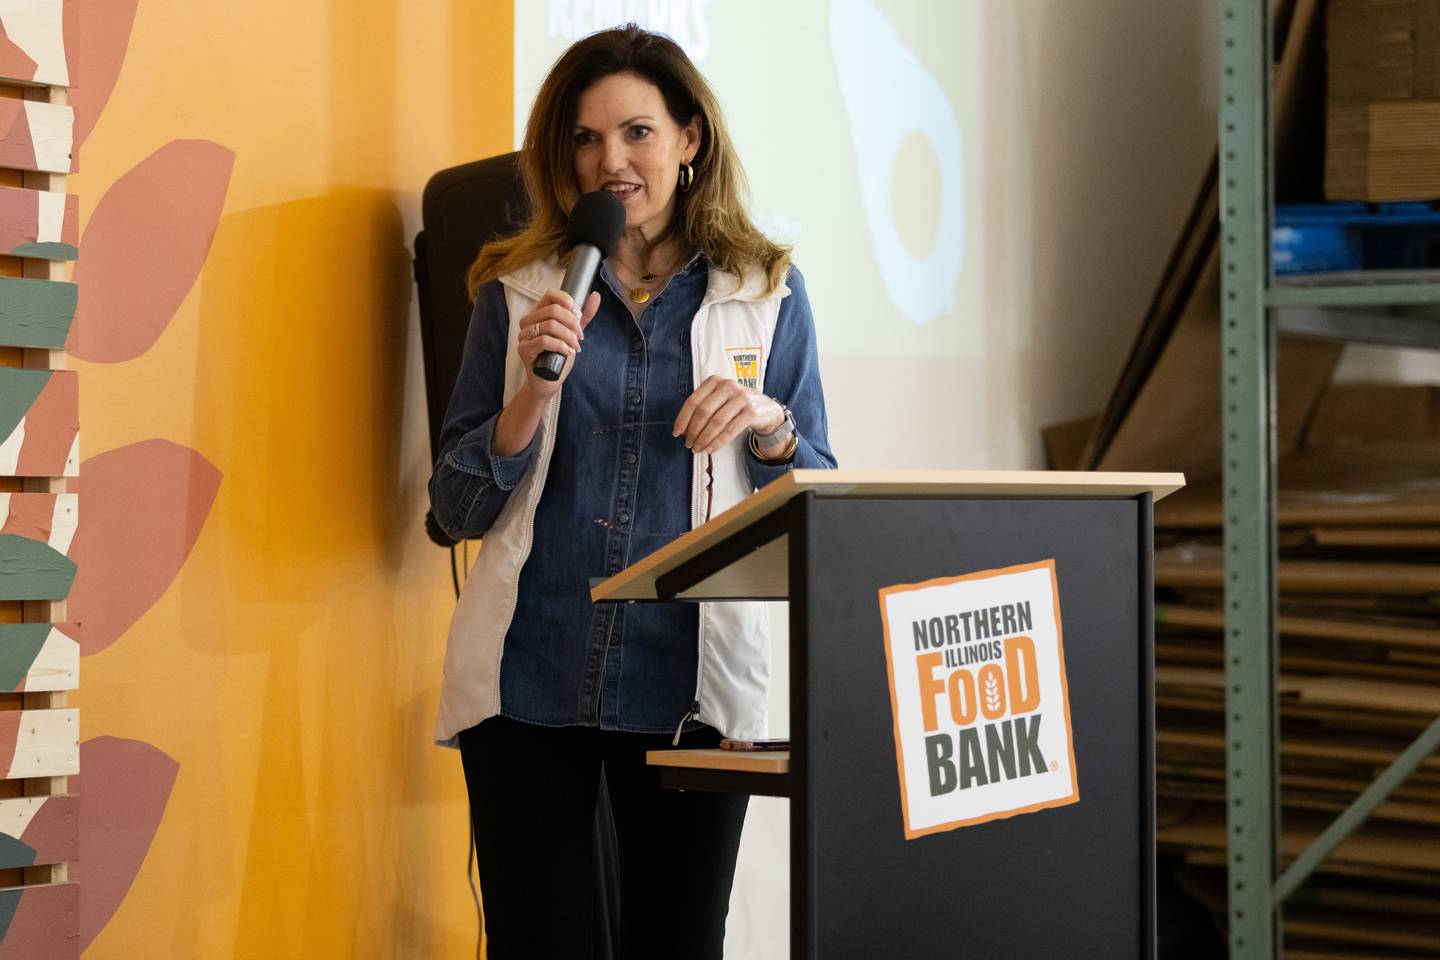 Julie Yurko, President and CEO of Northern Illinois Food Bank, delivers remarks at the S.E.E.D. graduation at the Northern Illinois Food Bank South Suburban Center in Joliet on March 14, 2024.